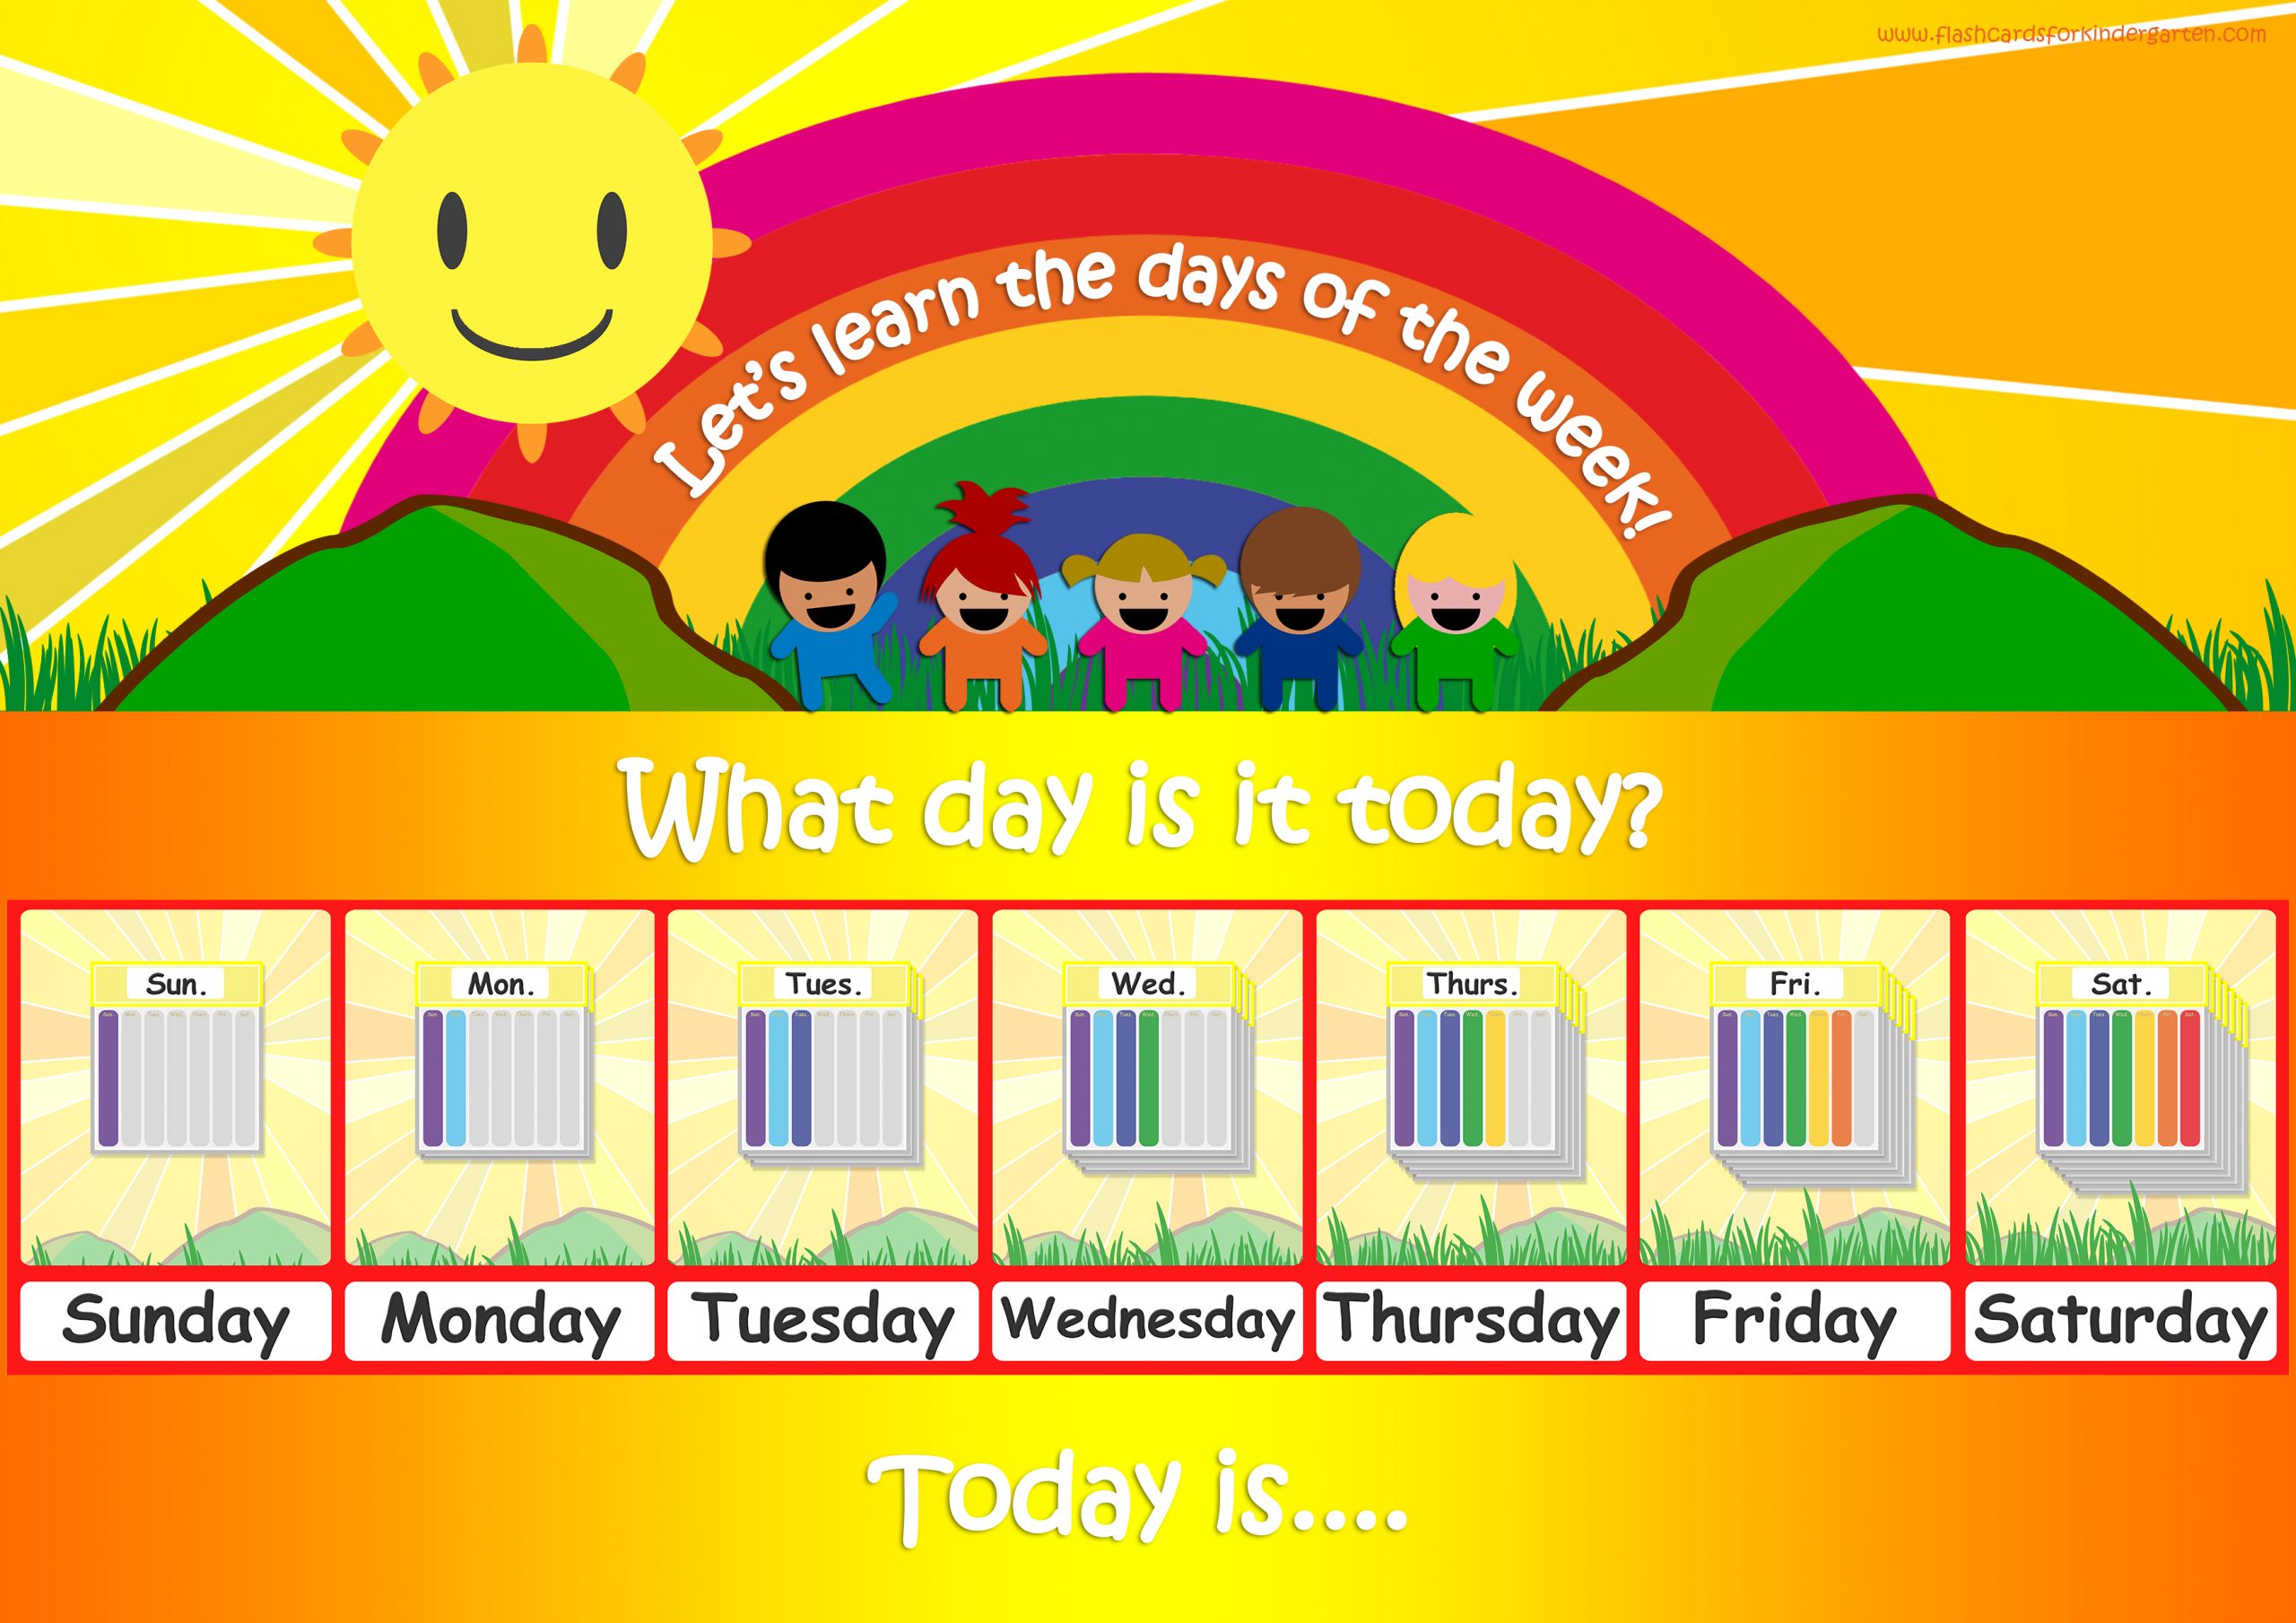 Days Of The Week Printable Flashcards